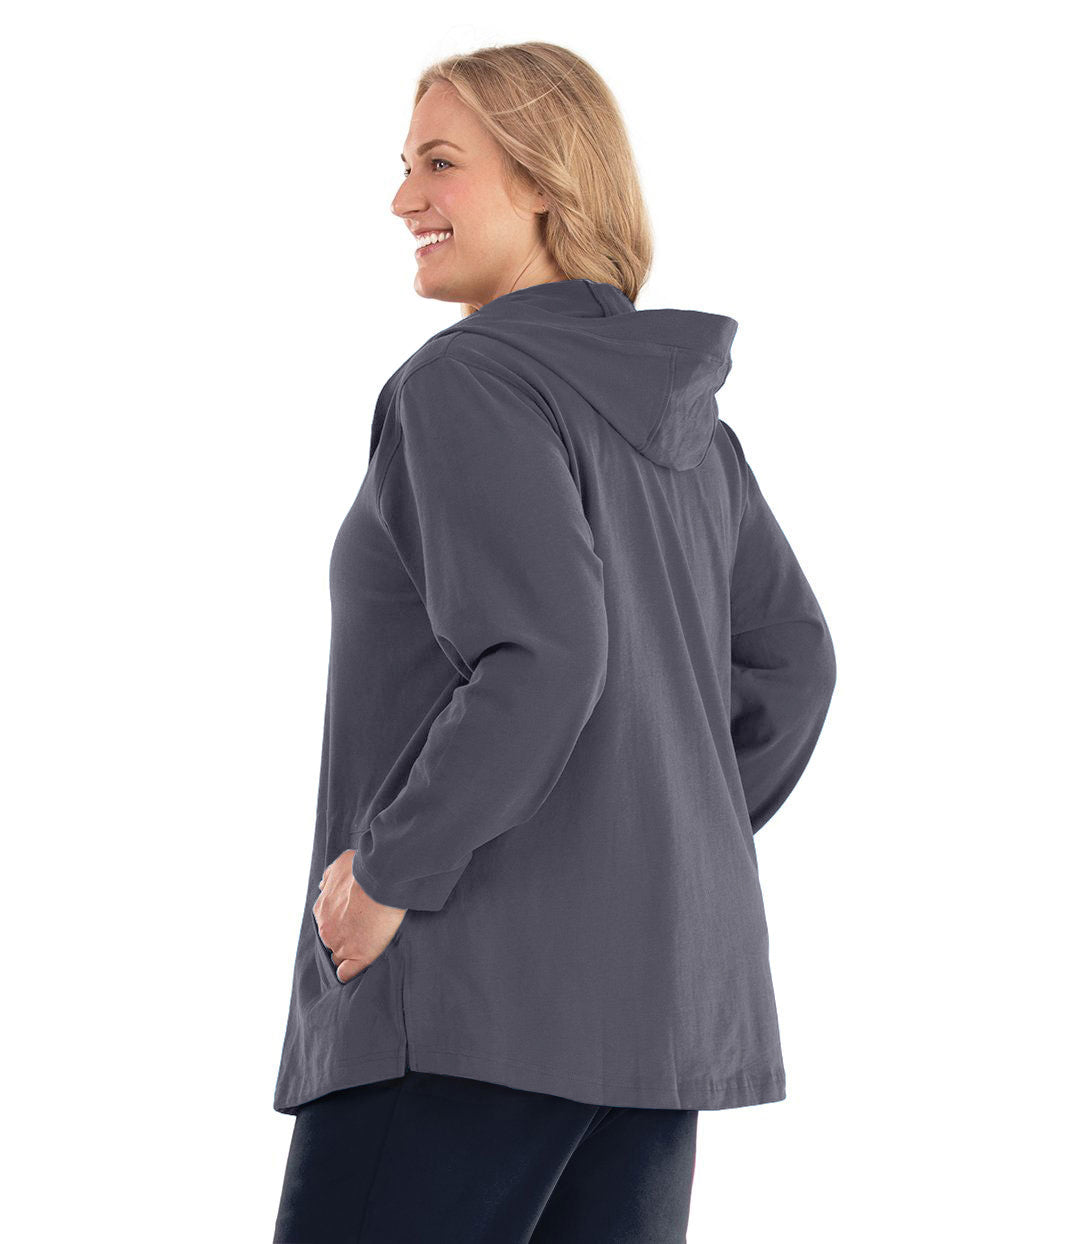 Plus size woman, facing back, wearing Legacy Cotton Casual Button Up Hoodie in Misty Grey. Both hands are in side pockets of hoodie.